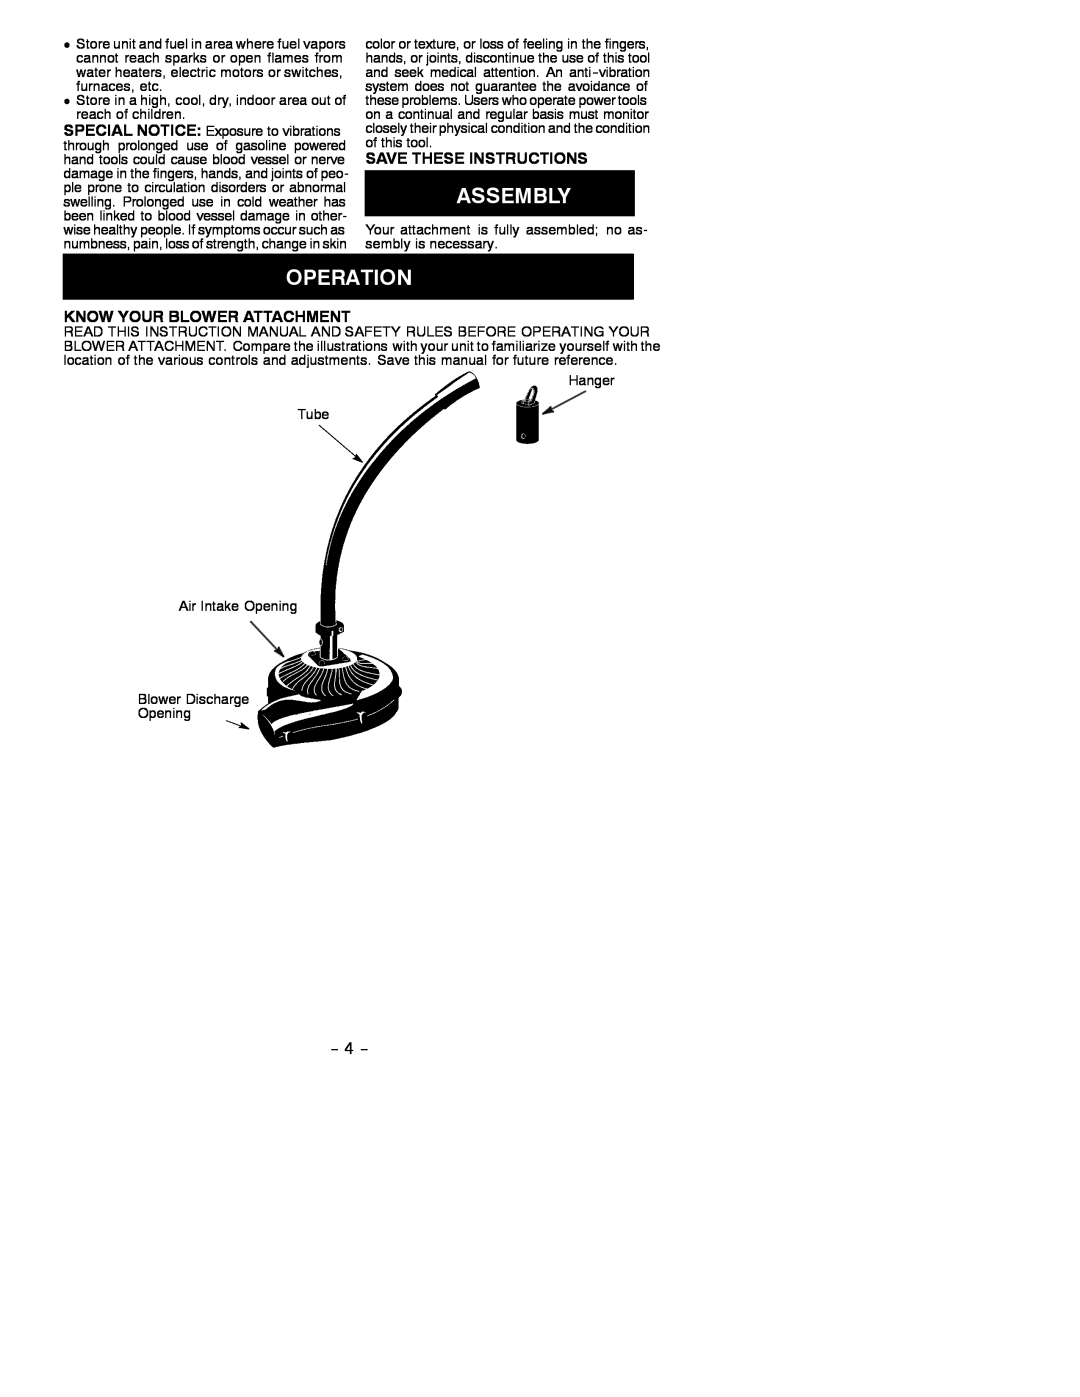 Poulan 3000B instruction manual Save These Instructions, Know Your Blower Attachment 